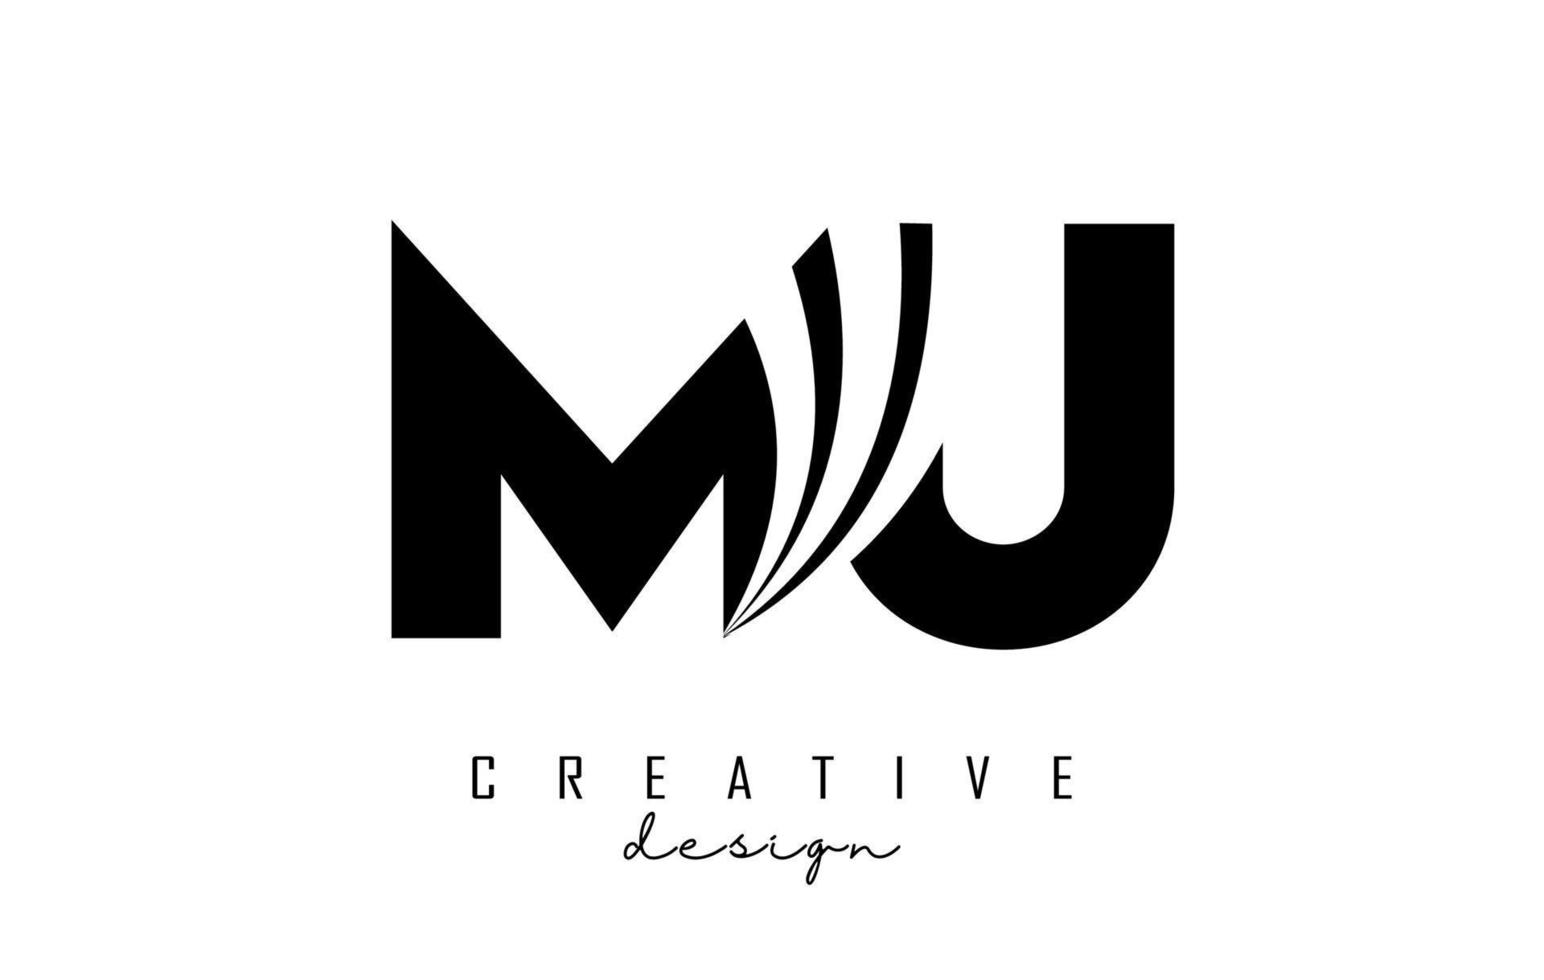 Creative black letters MU m u logo with leading lines and road concept design. Letters with geometric design. vector